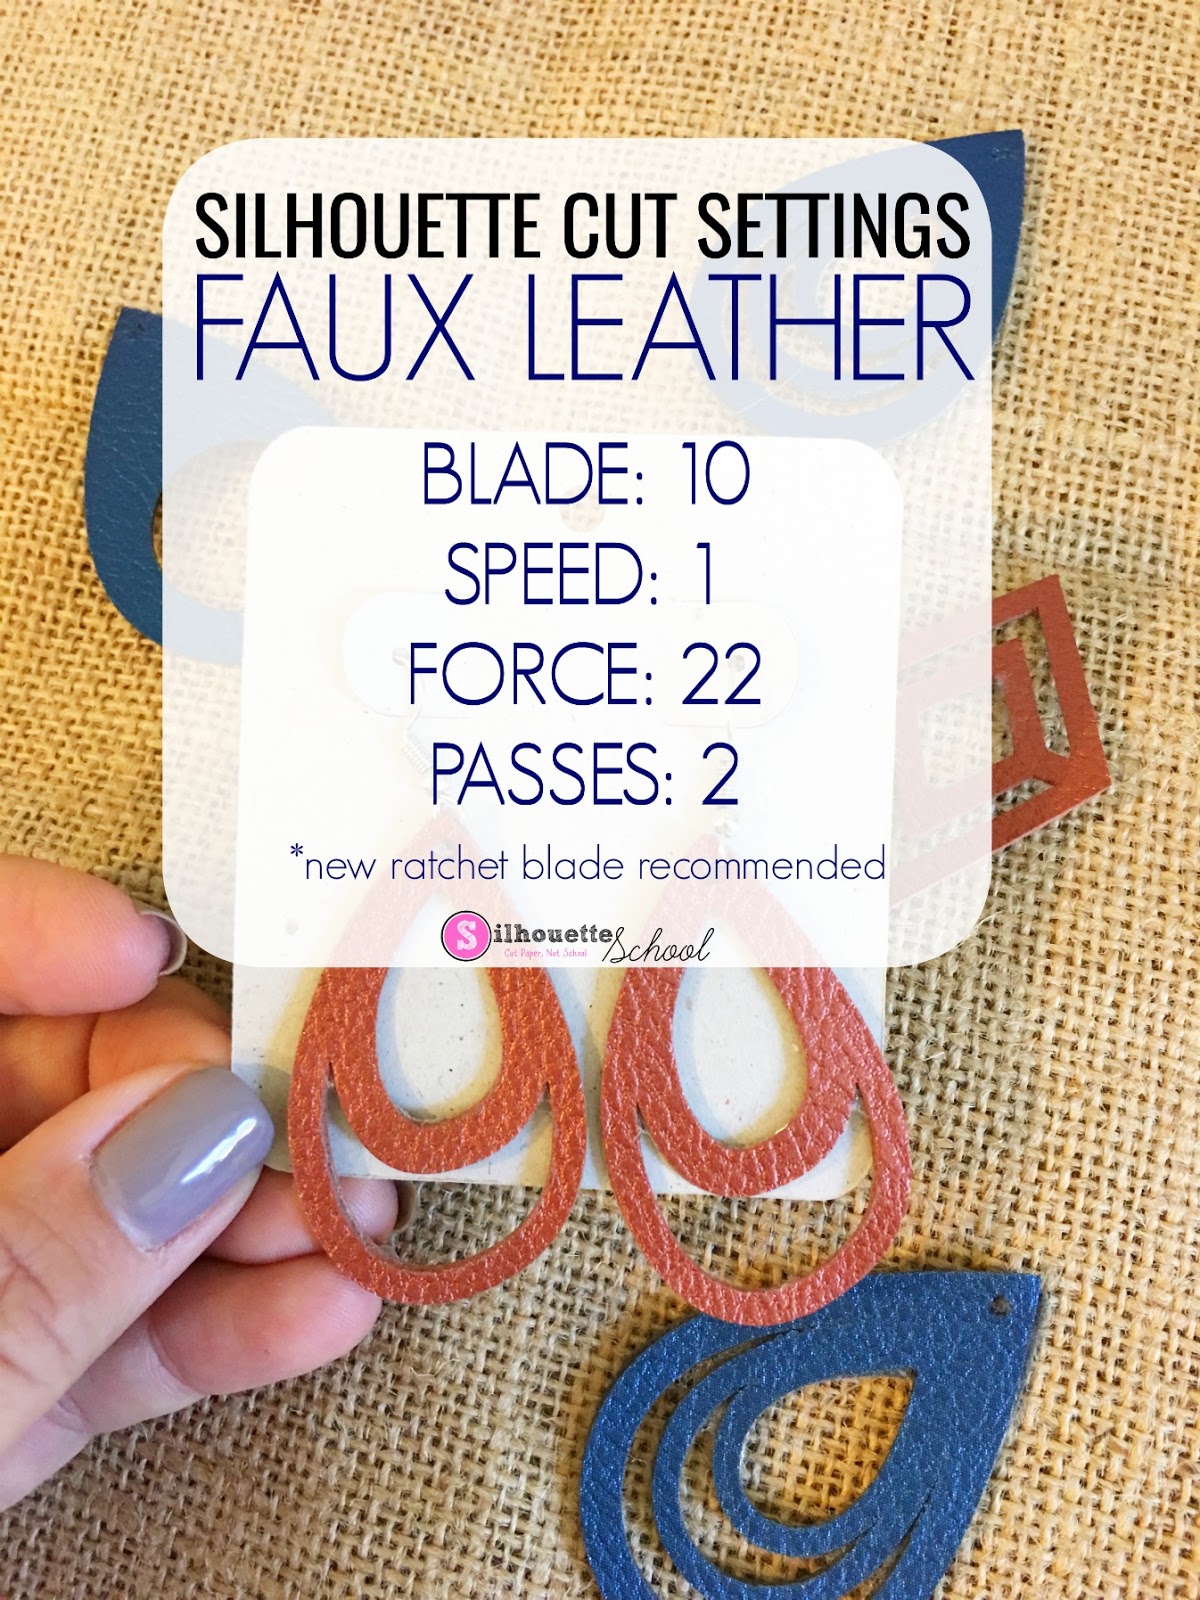 Silhouette Autoblade 3 Pack Replacement Blades for Cameo 3 and Portrait  2-50 Free Designs